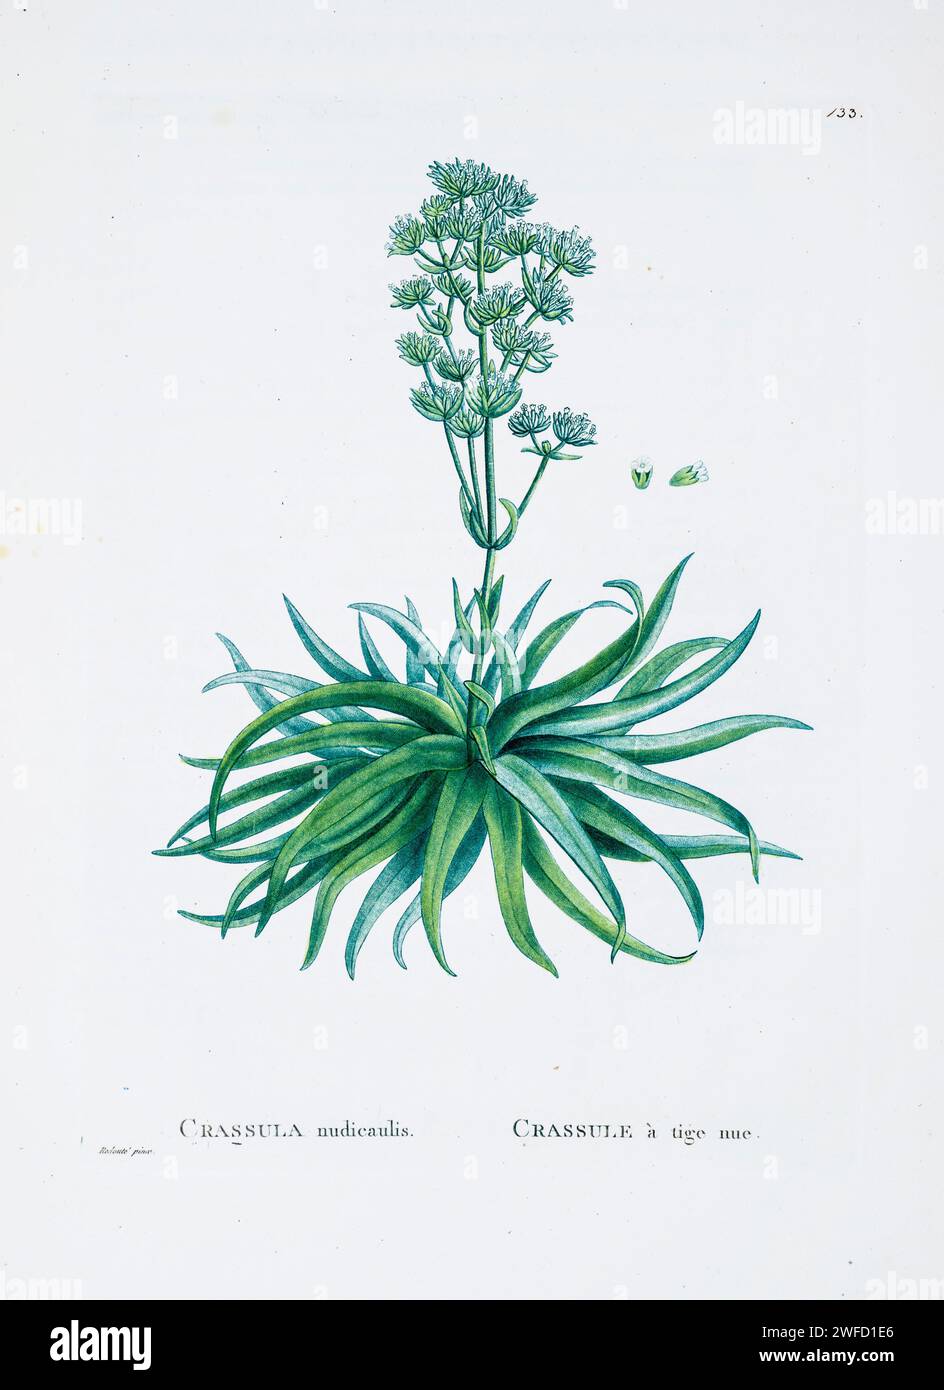 Crassula nudicaulis from History of Succulent Plants [Plantarum historia succulentarum / Histoire des plantes grasses] painted by Pierre-Joseph Redouté and described by Augustin Pyramus de Candolle 1799 Stock Photo